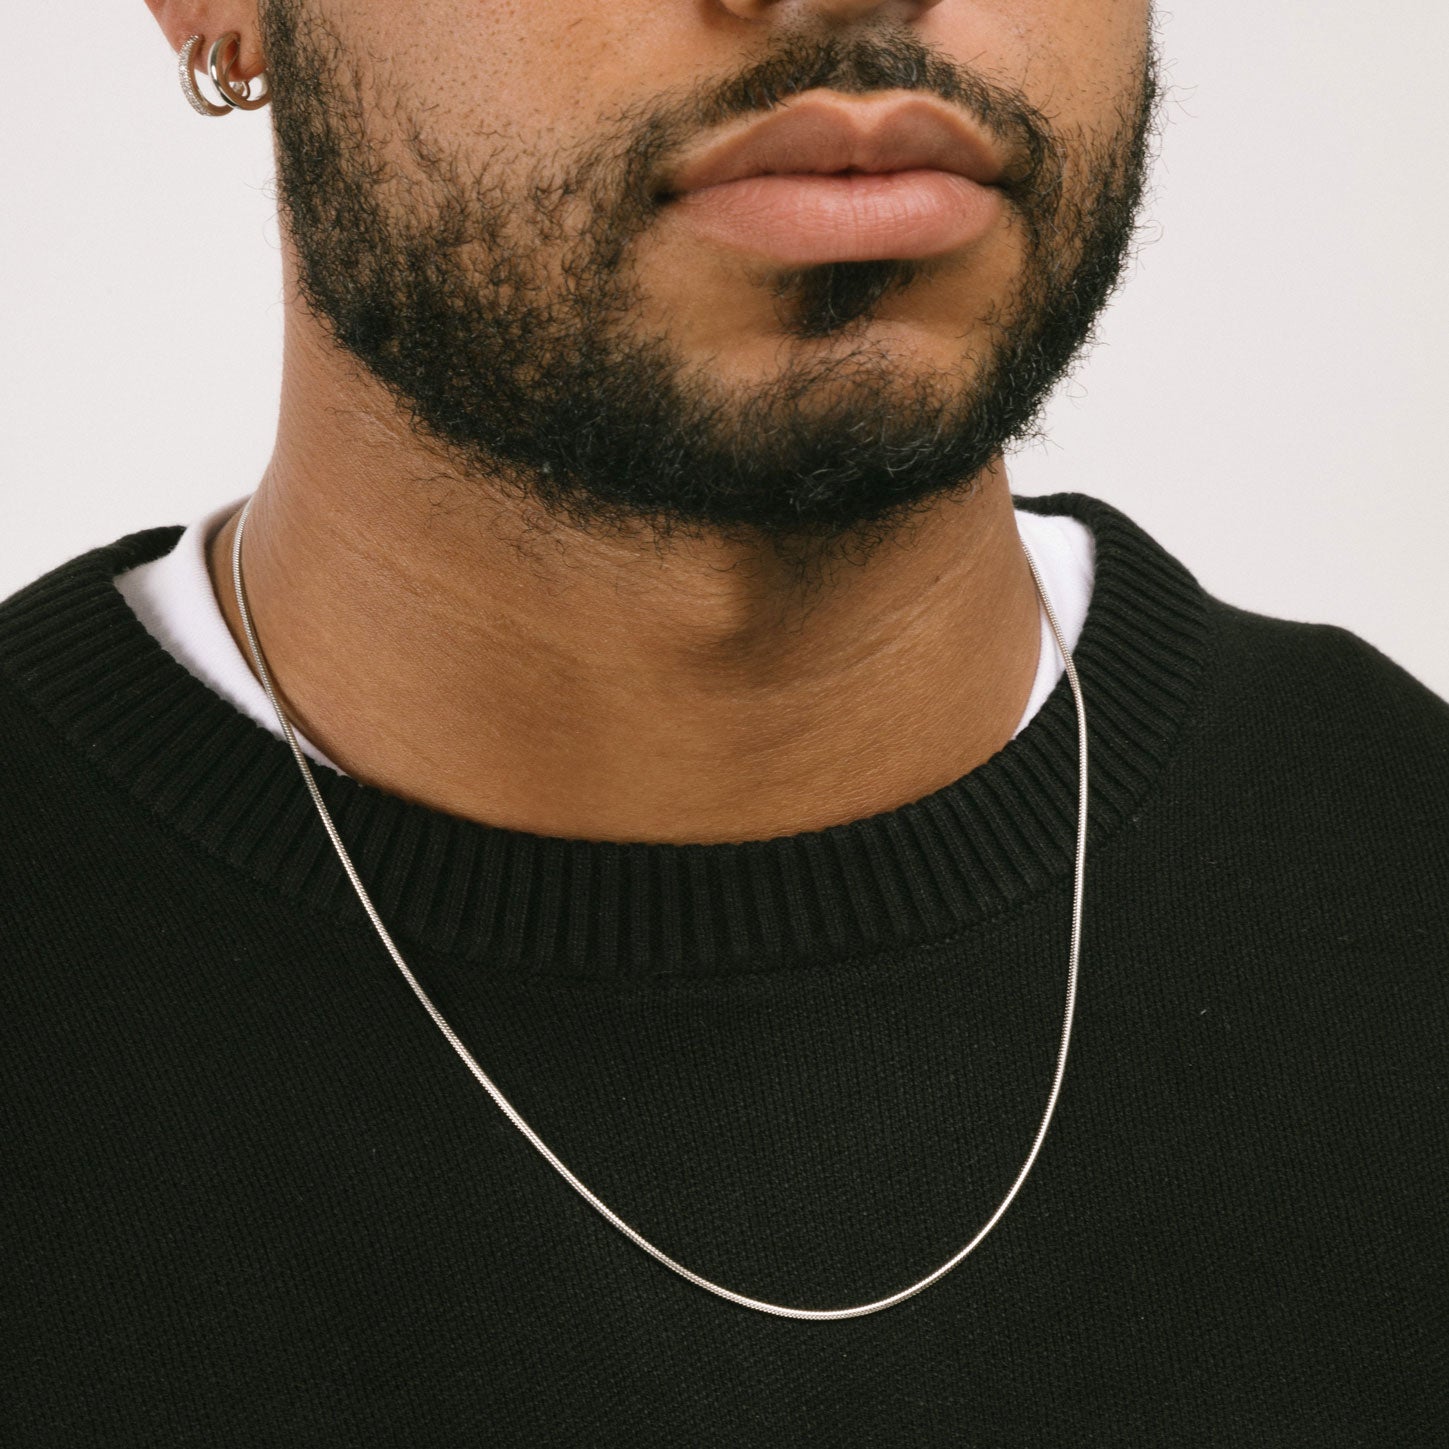 A model wearing the 1.5mm Snake Chain is made of durable stainless steel, measuring 22 inches in length. It's also non-tarnish and water-resistant for extra protection.